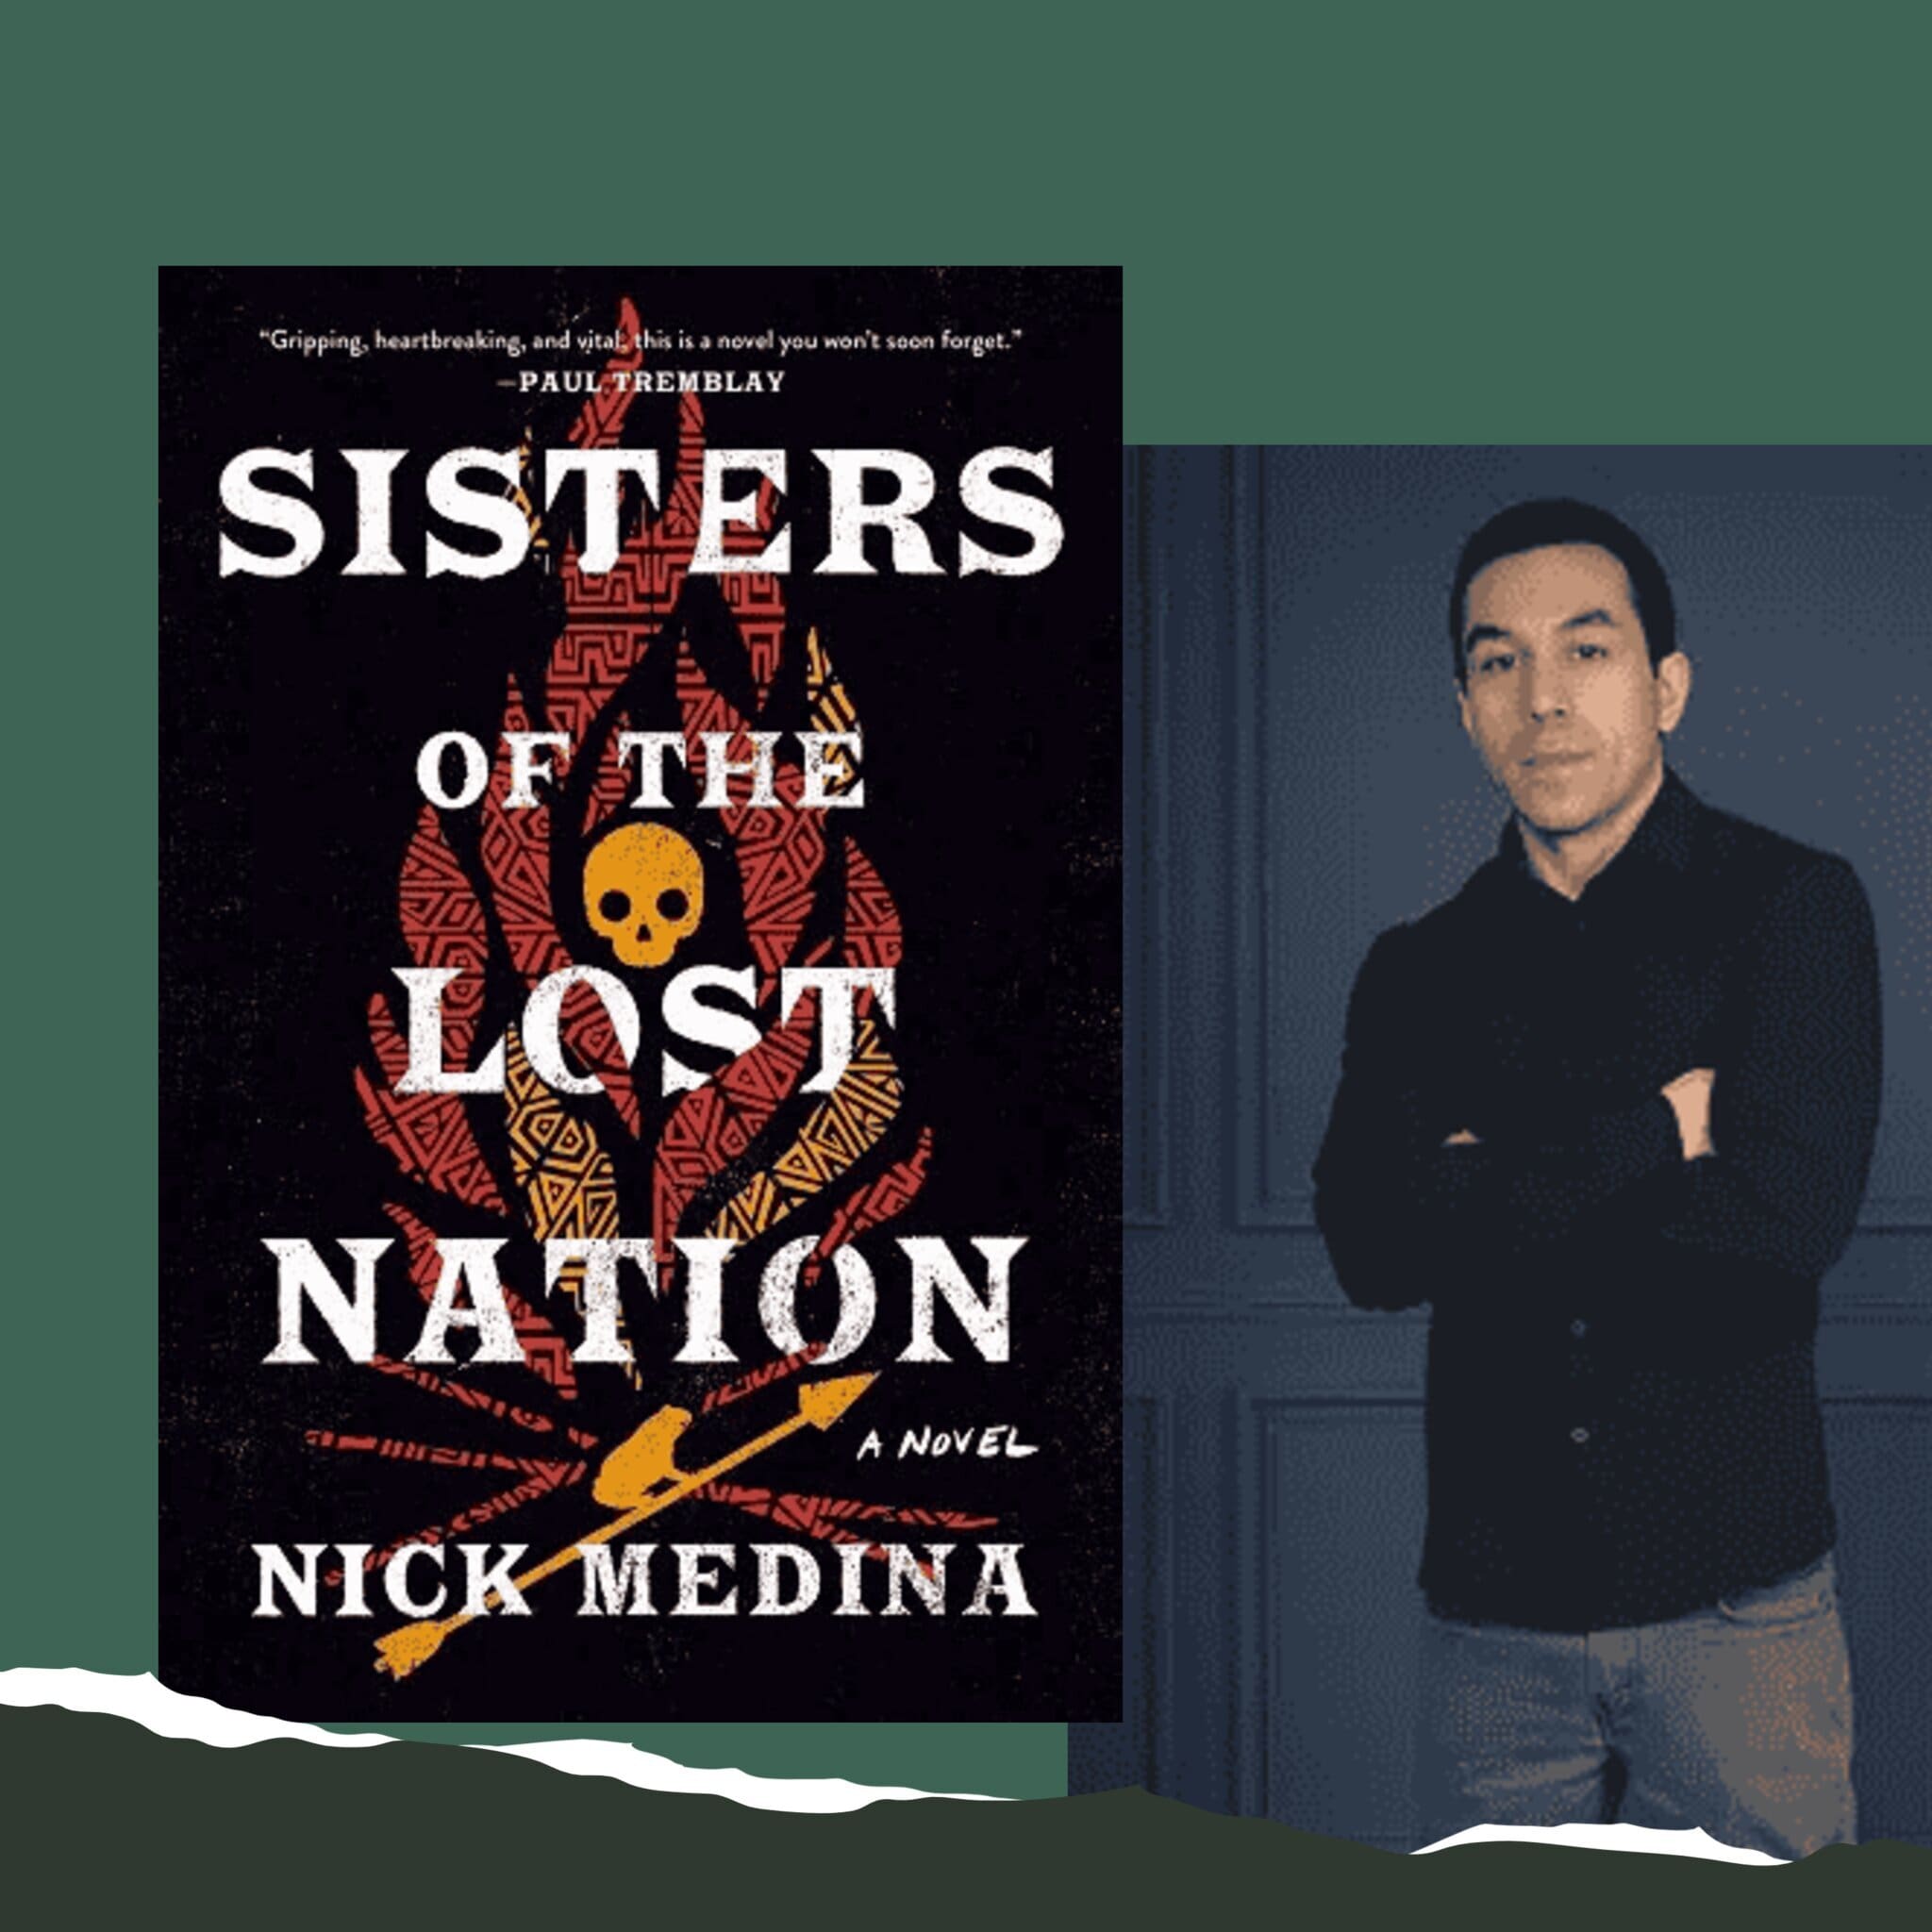 sisters of the lost nation book cover and author nick medina